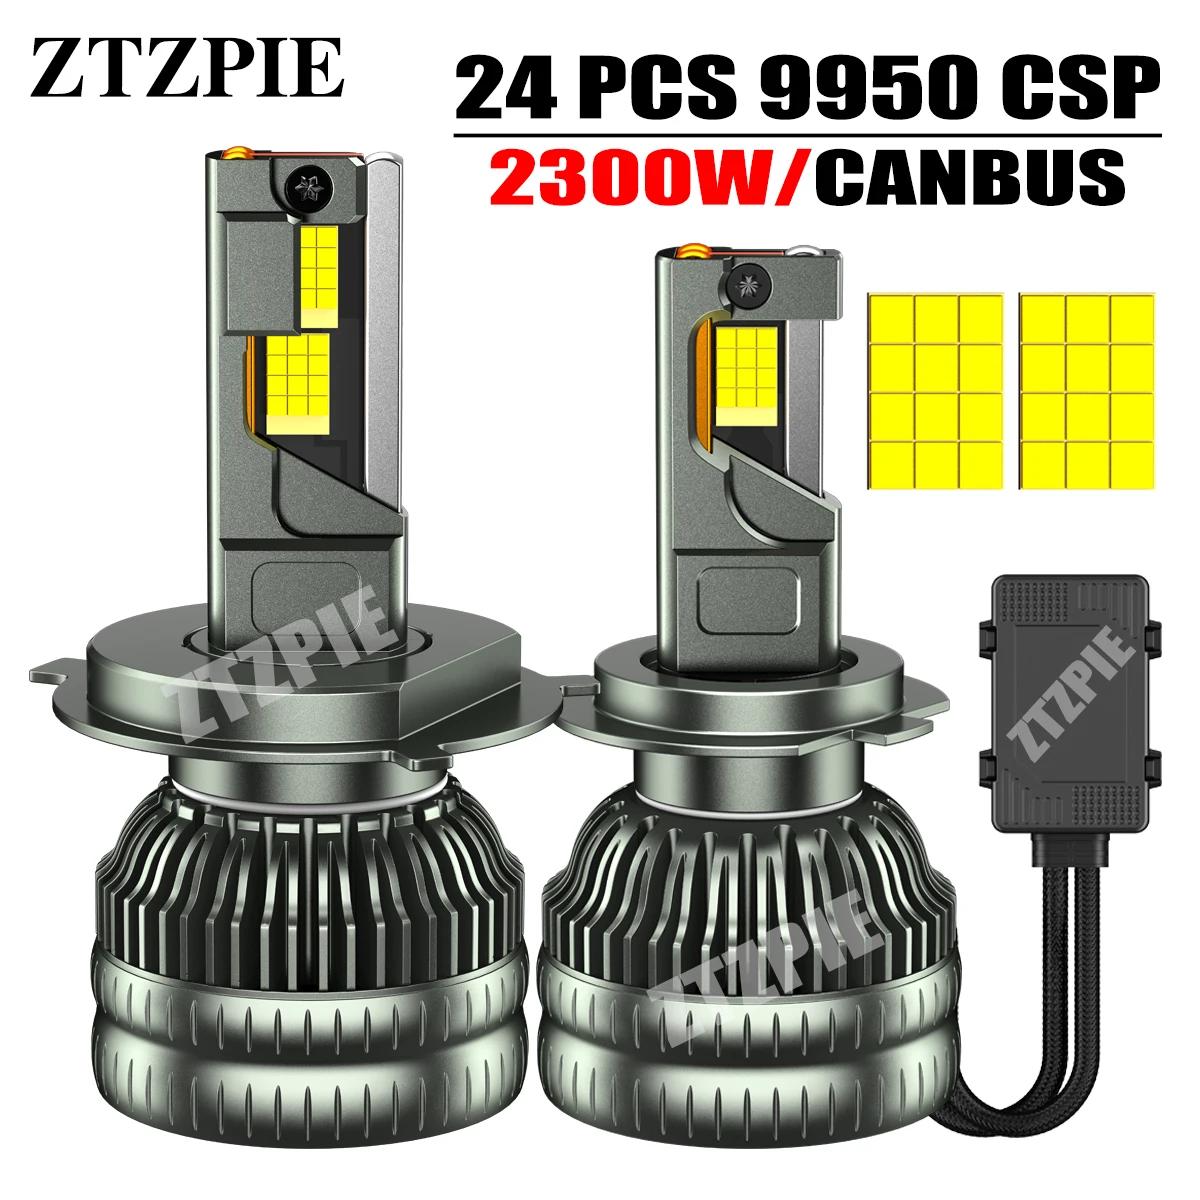 ZTZPIE 6000K 3  Ʃ, 9005 9006, H1, H7, H4, H11 , Canbus Led , 24 CSP 9950  ڵ Ʈ Ʈ, 2300W, 3000000LM